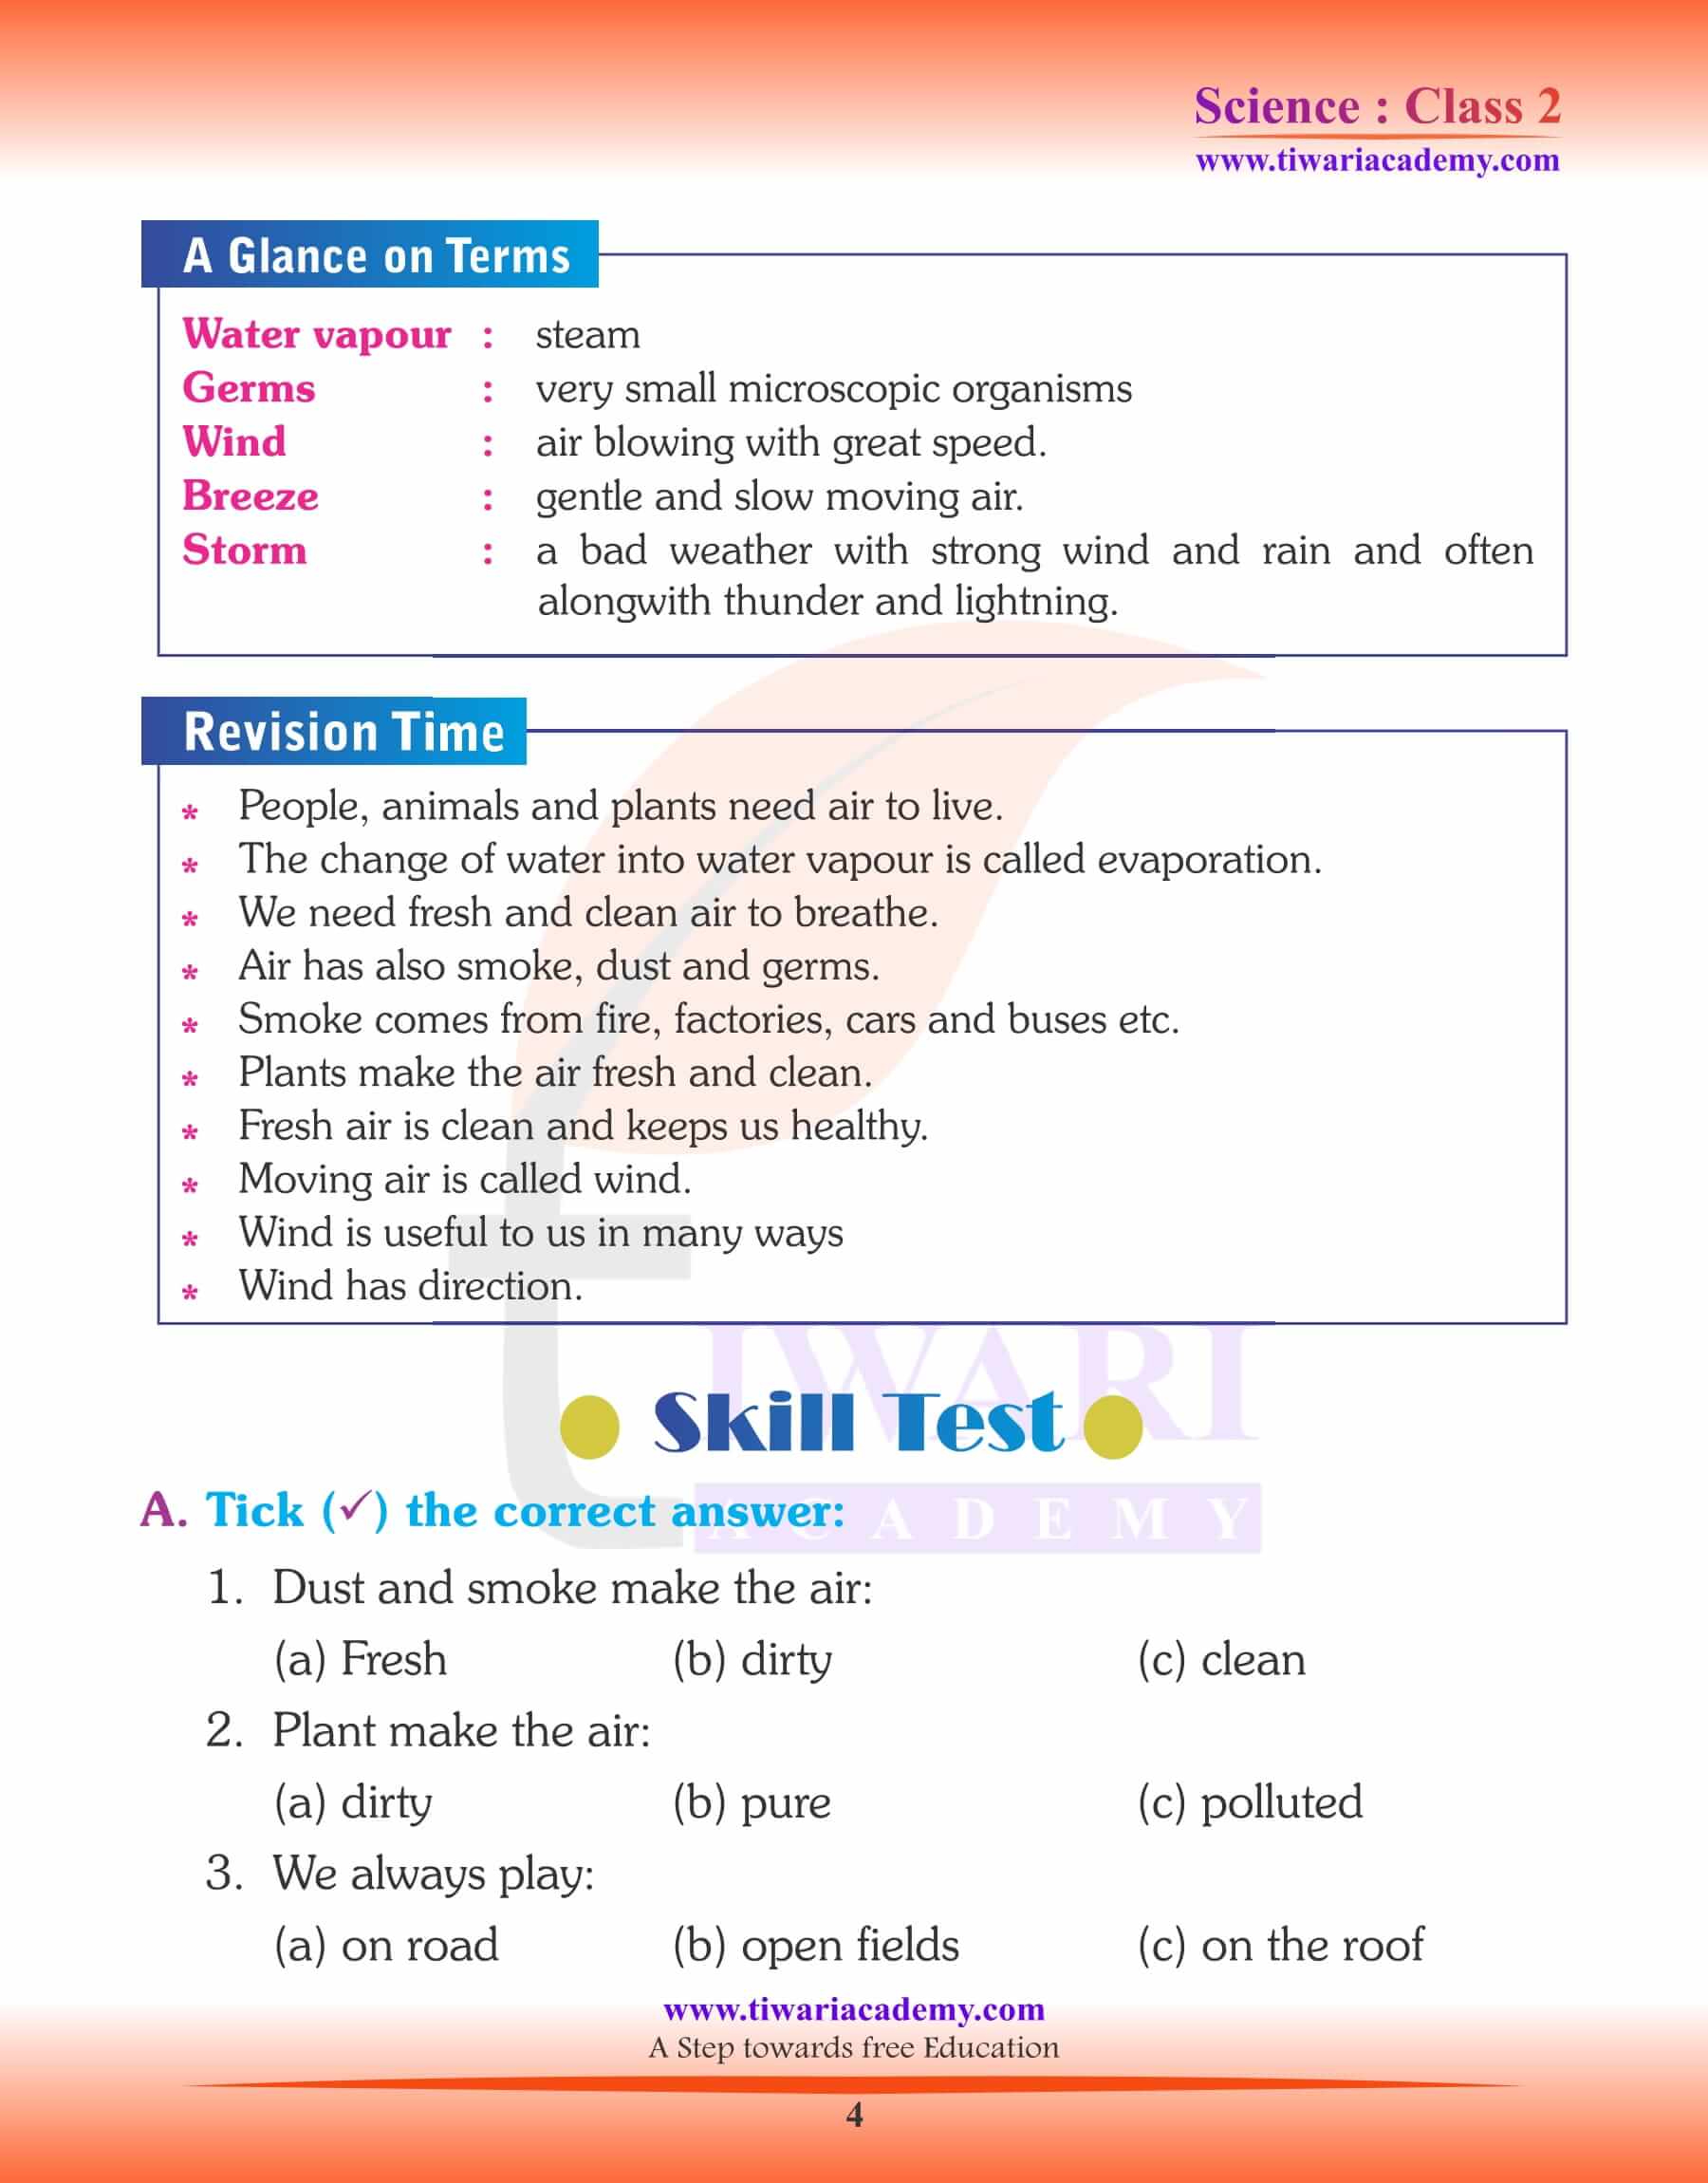 NCERT Solutions for Class 2 Science Chapter 9 Assignements